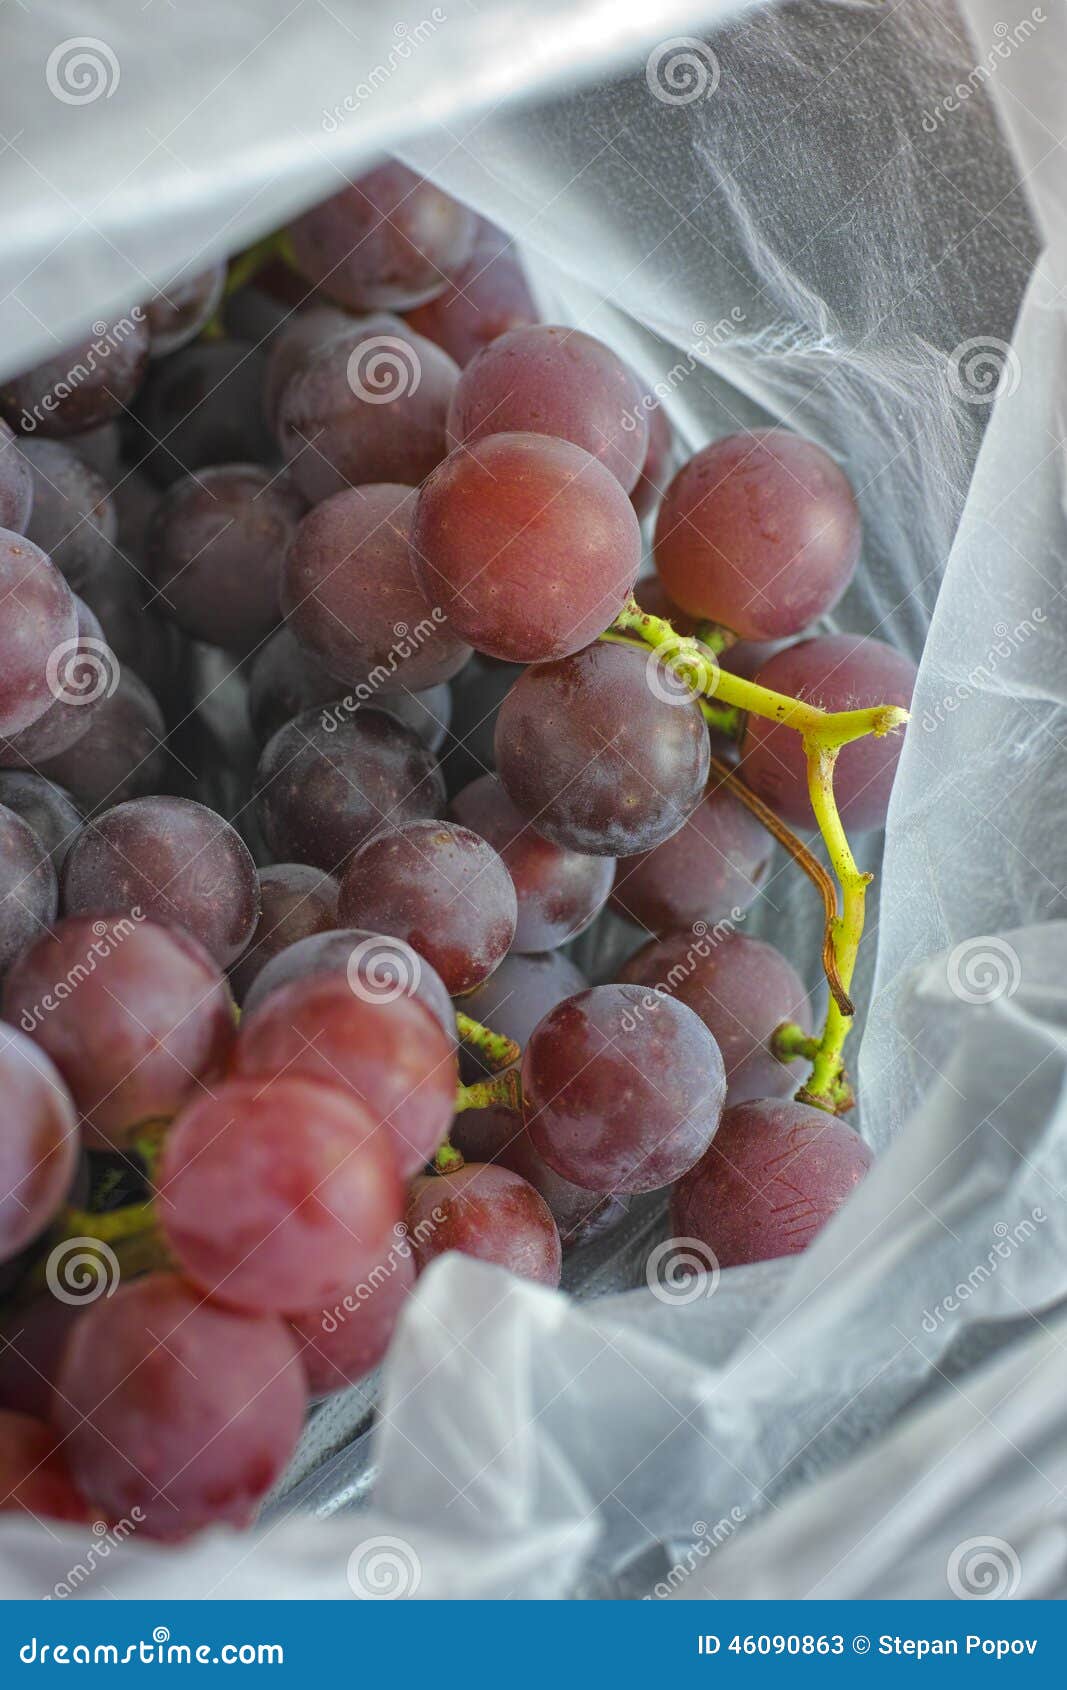 Woman Holding Fruits in a Plastic Bag · Free Stock Photo